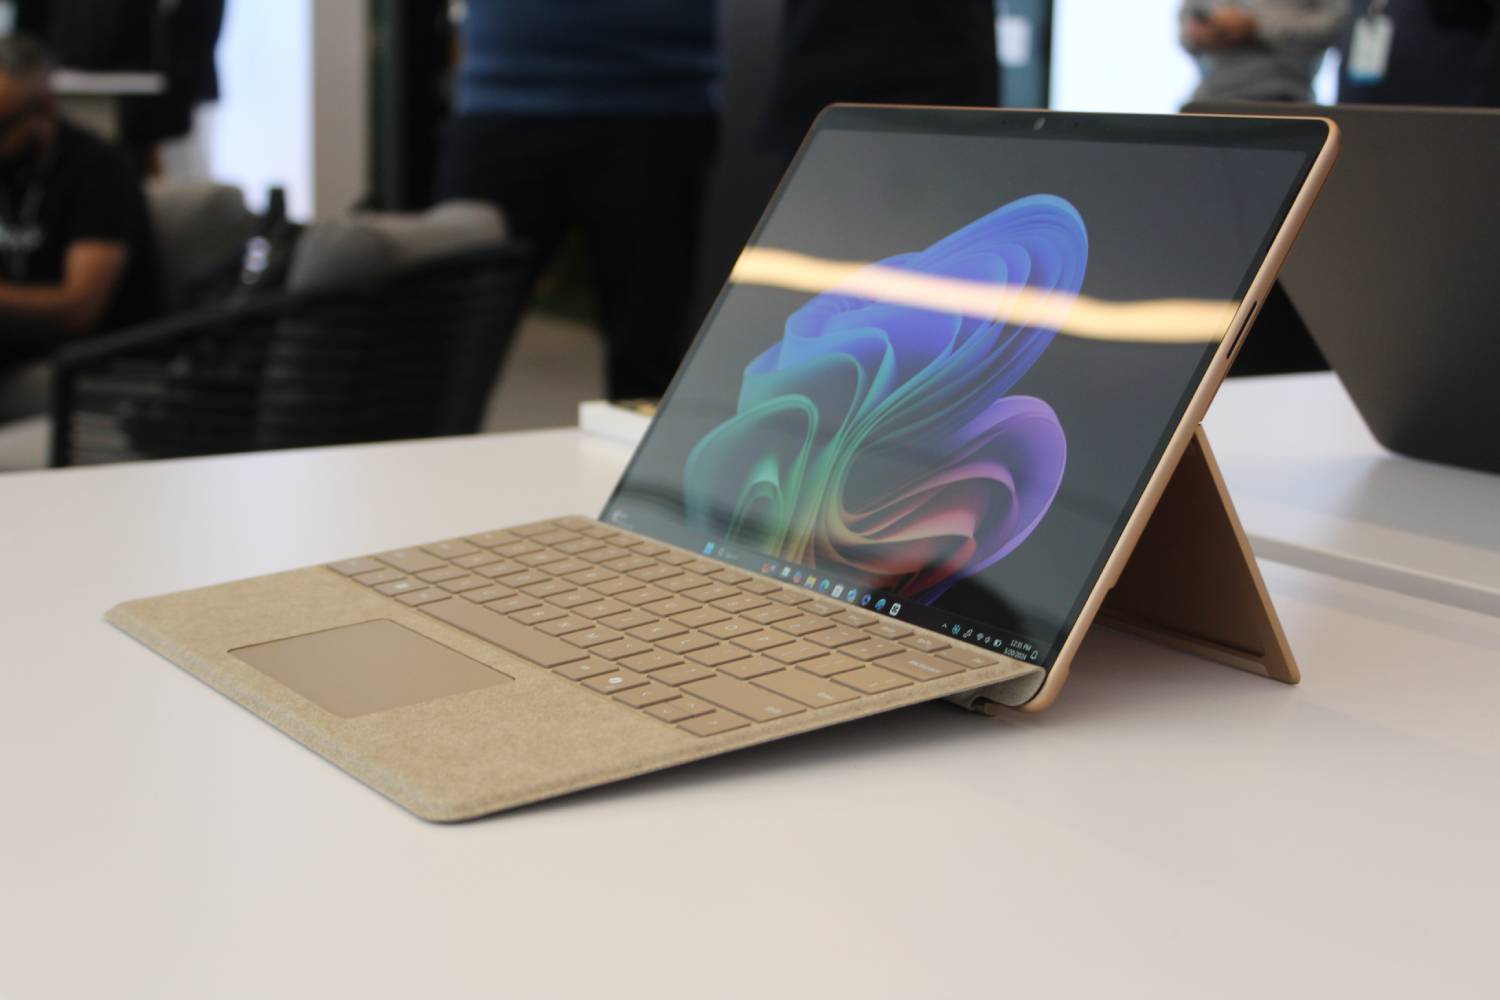 The Surface Pro with the keyboard attached on a table.